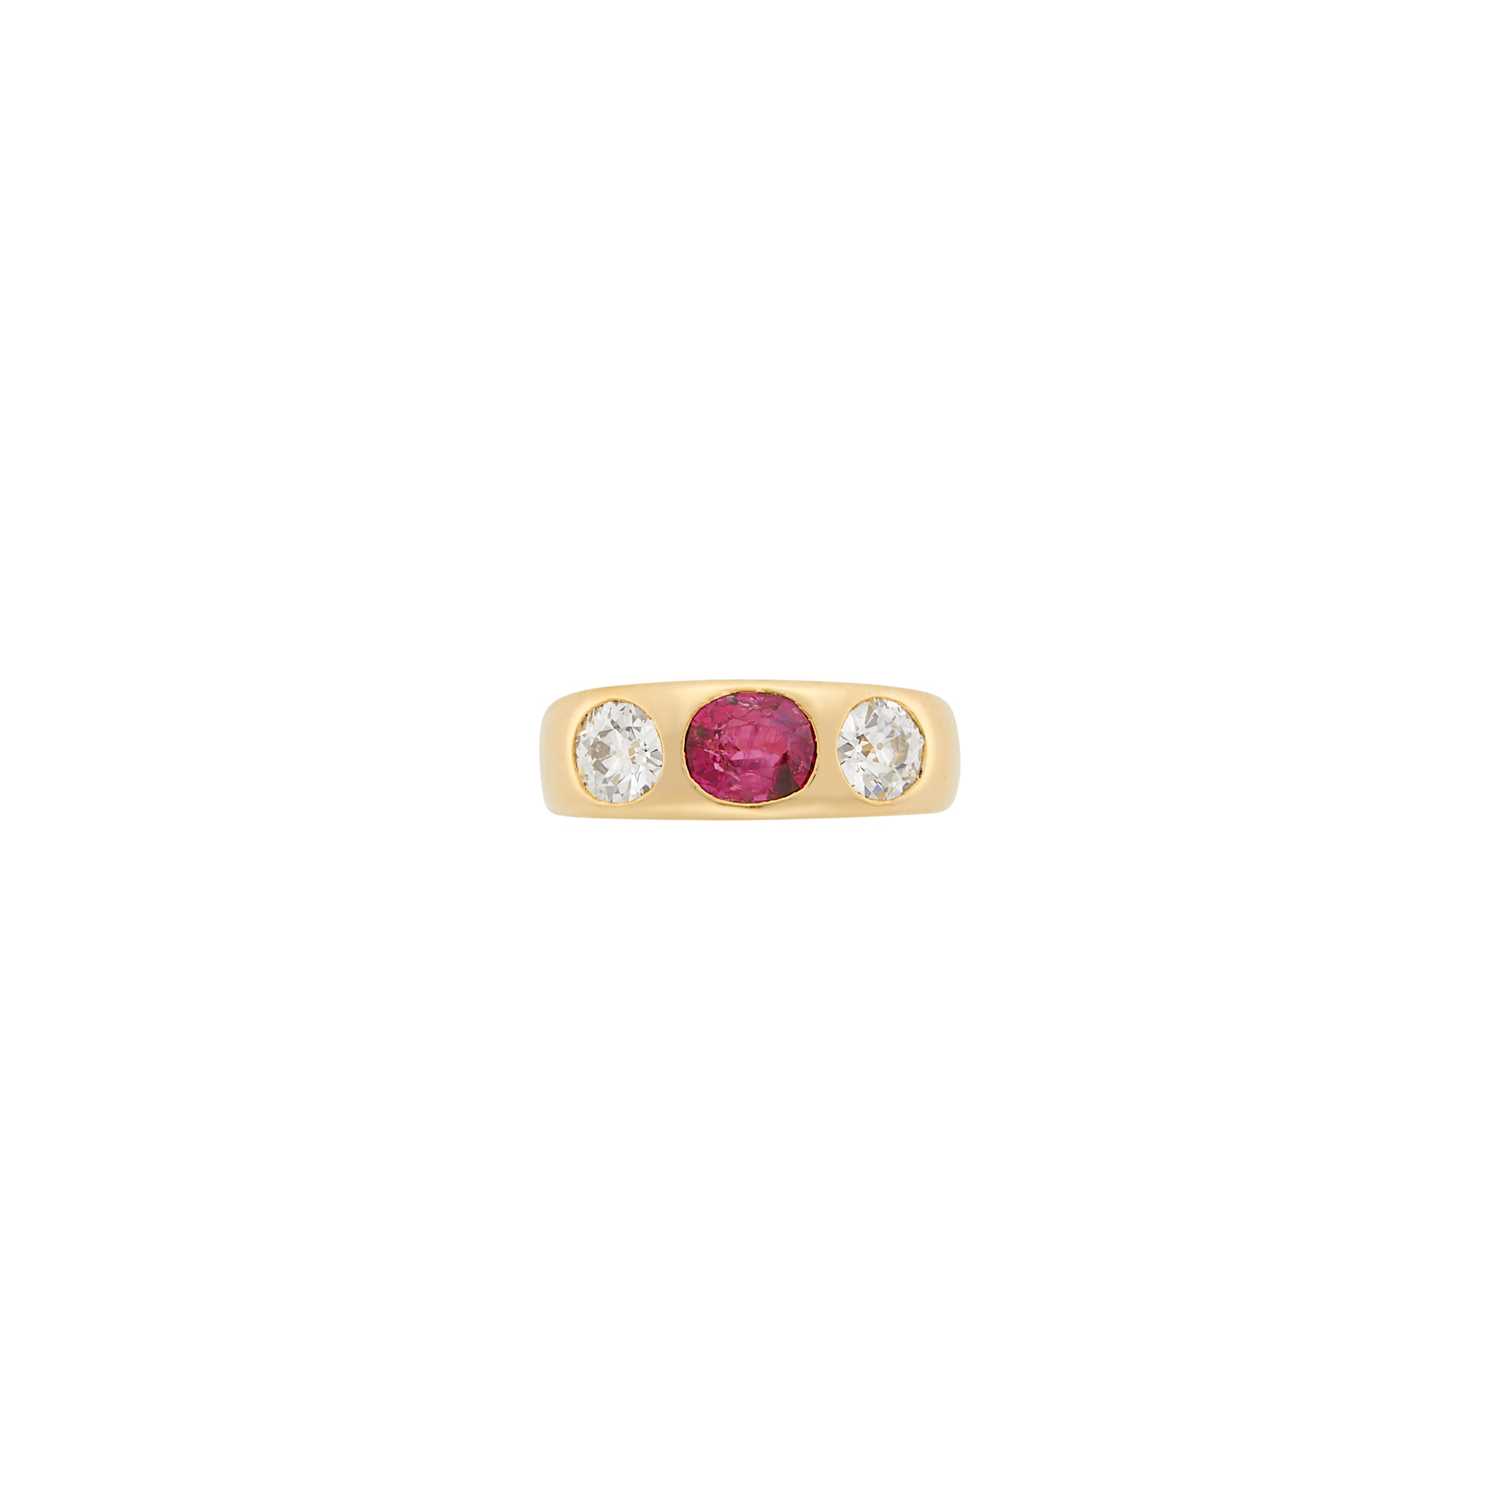 Lot 1076 - Antique Rose Gold, Ruby and Diamond Gypsy Ring